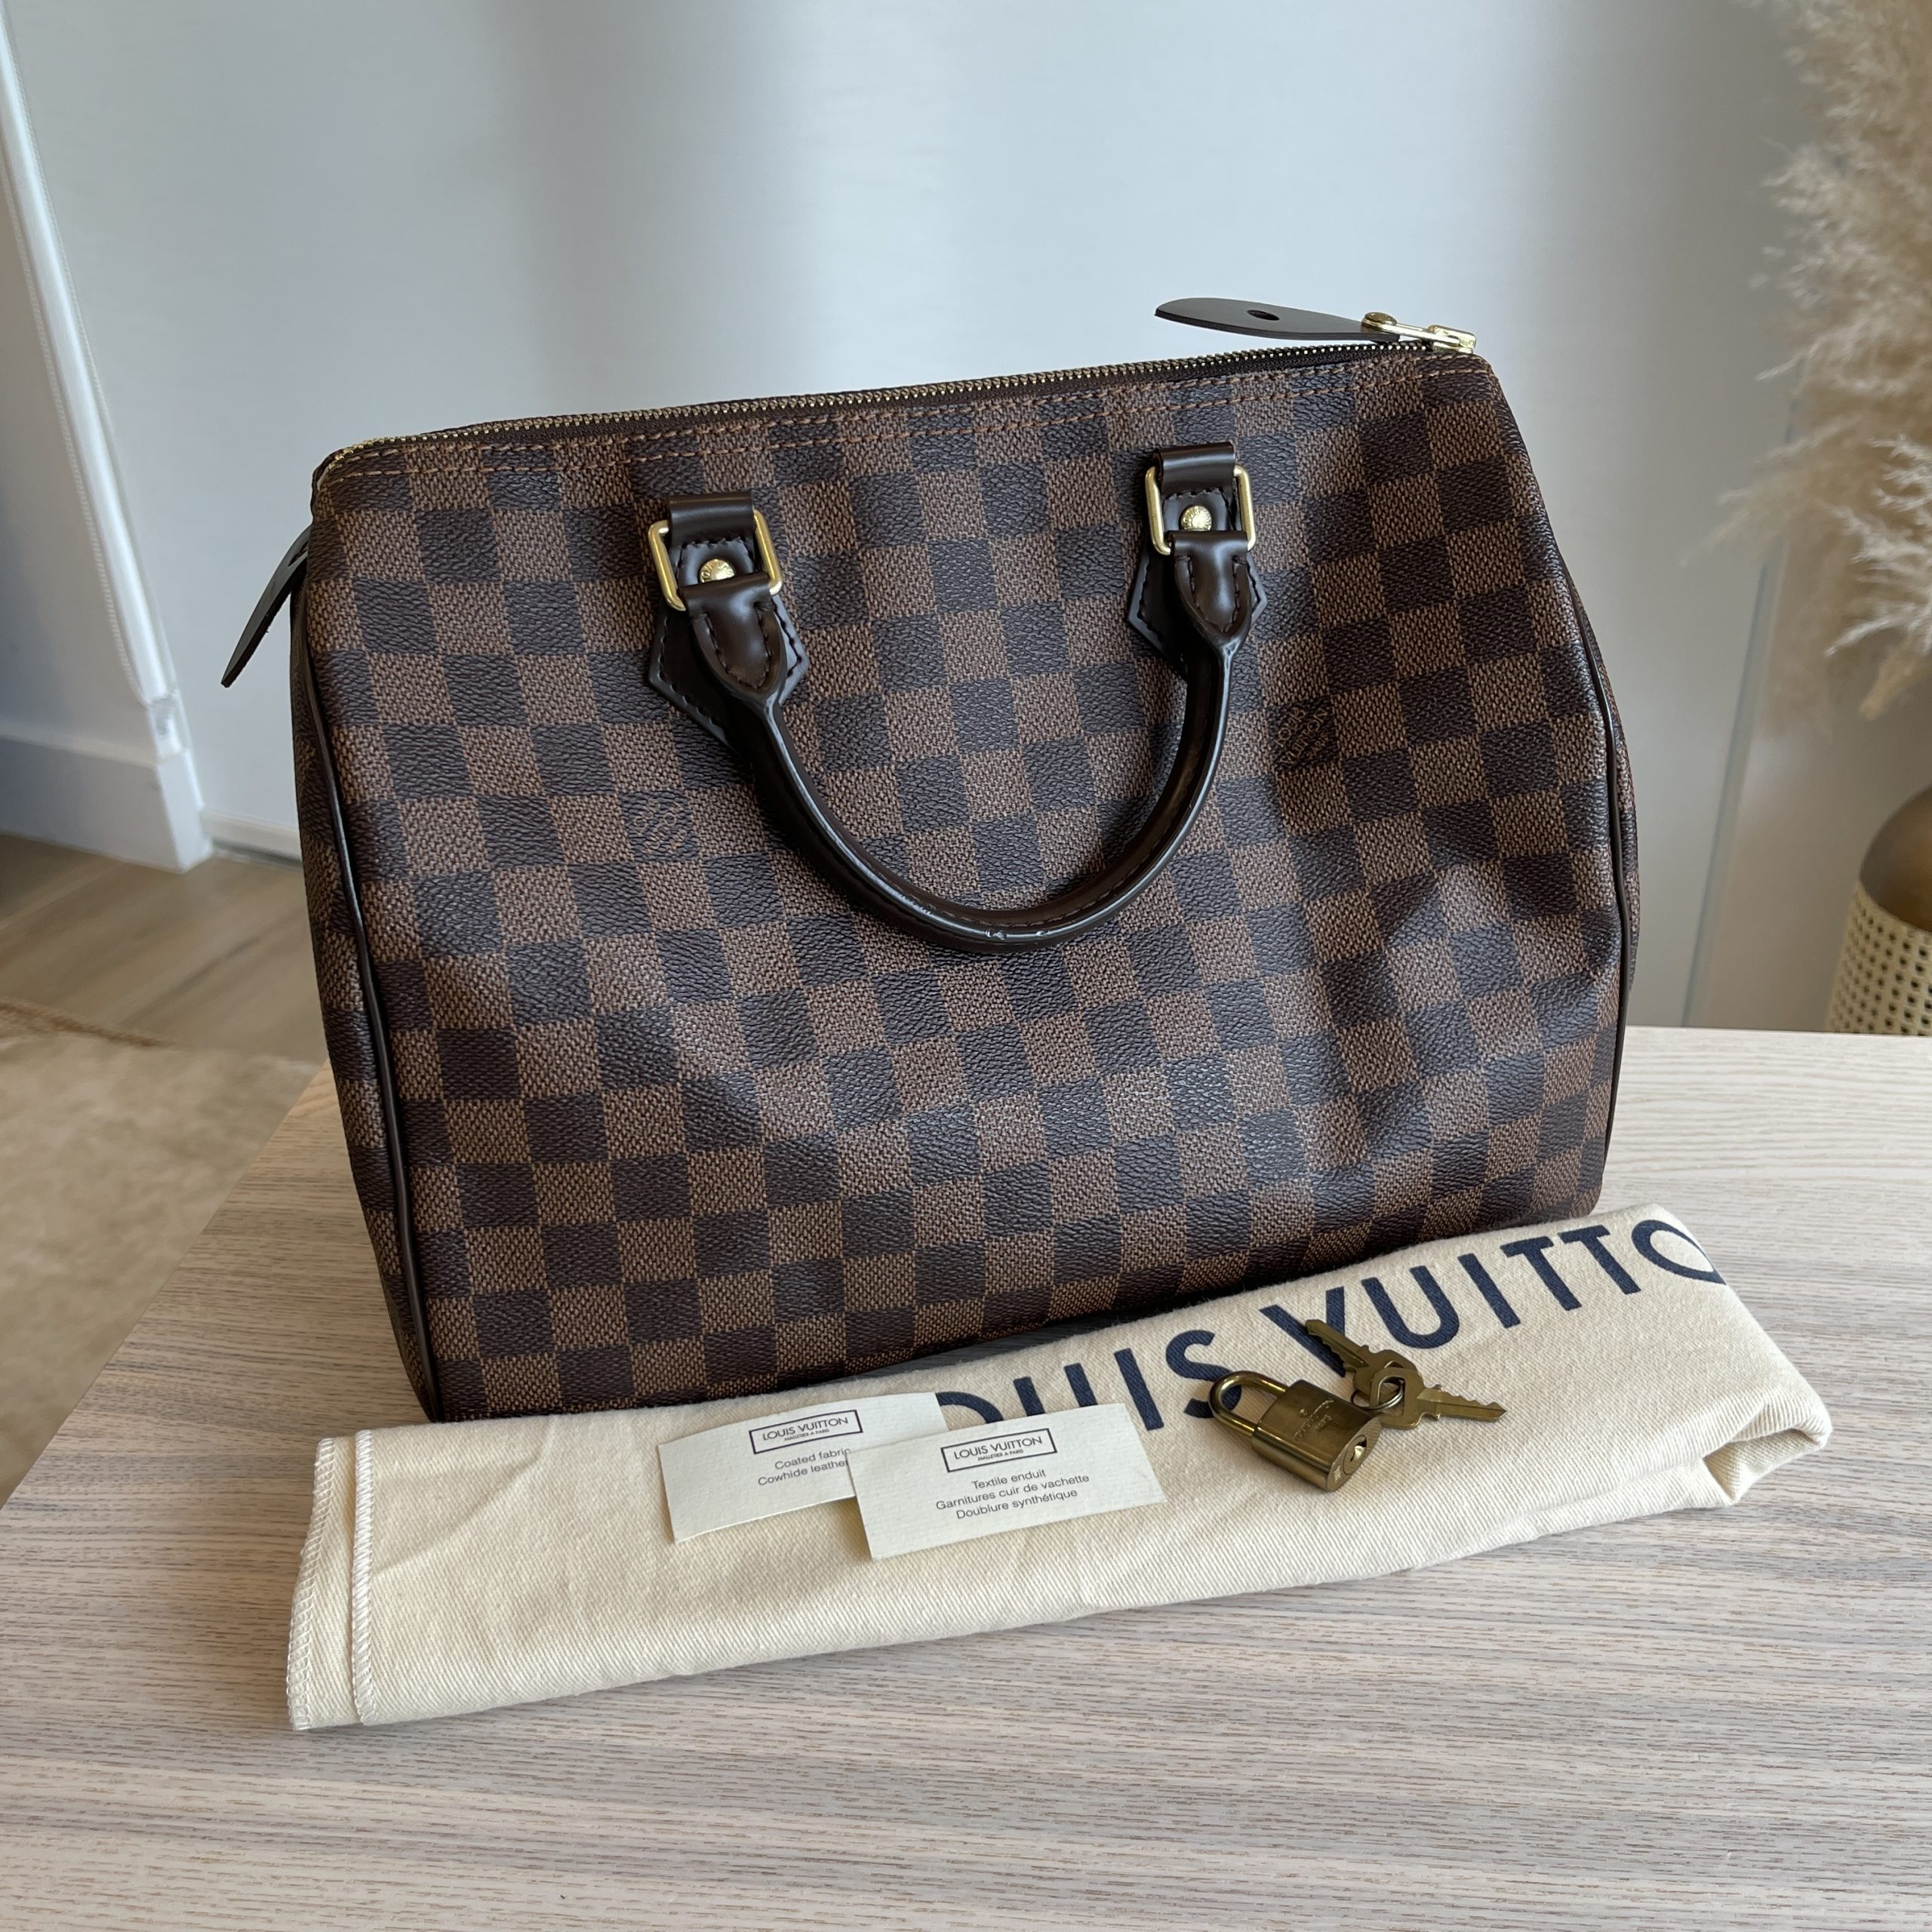 Beautiful Louis Vuitton Speedy 30 Damier Ebene Only $1049  @sweetpurseonaity.com! *Buy Now, Pay Later; 4 Interest Free Payments of  $262.25! After you, By Sweet Purseonality